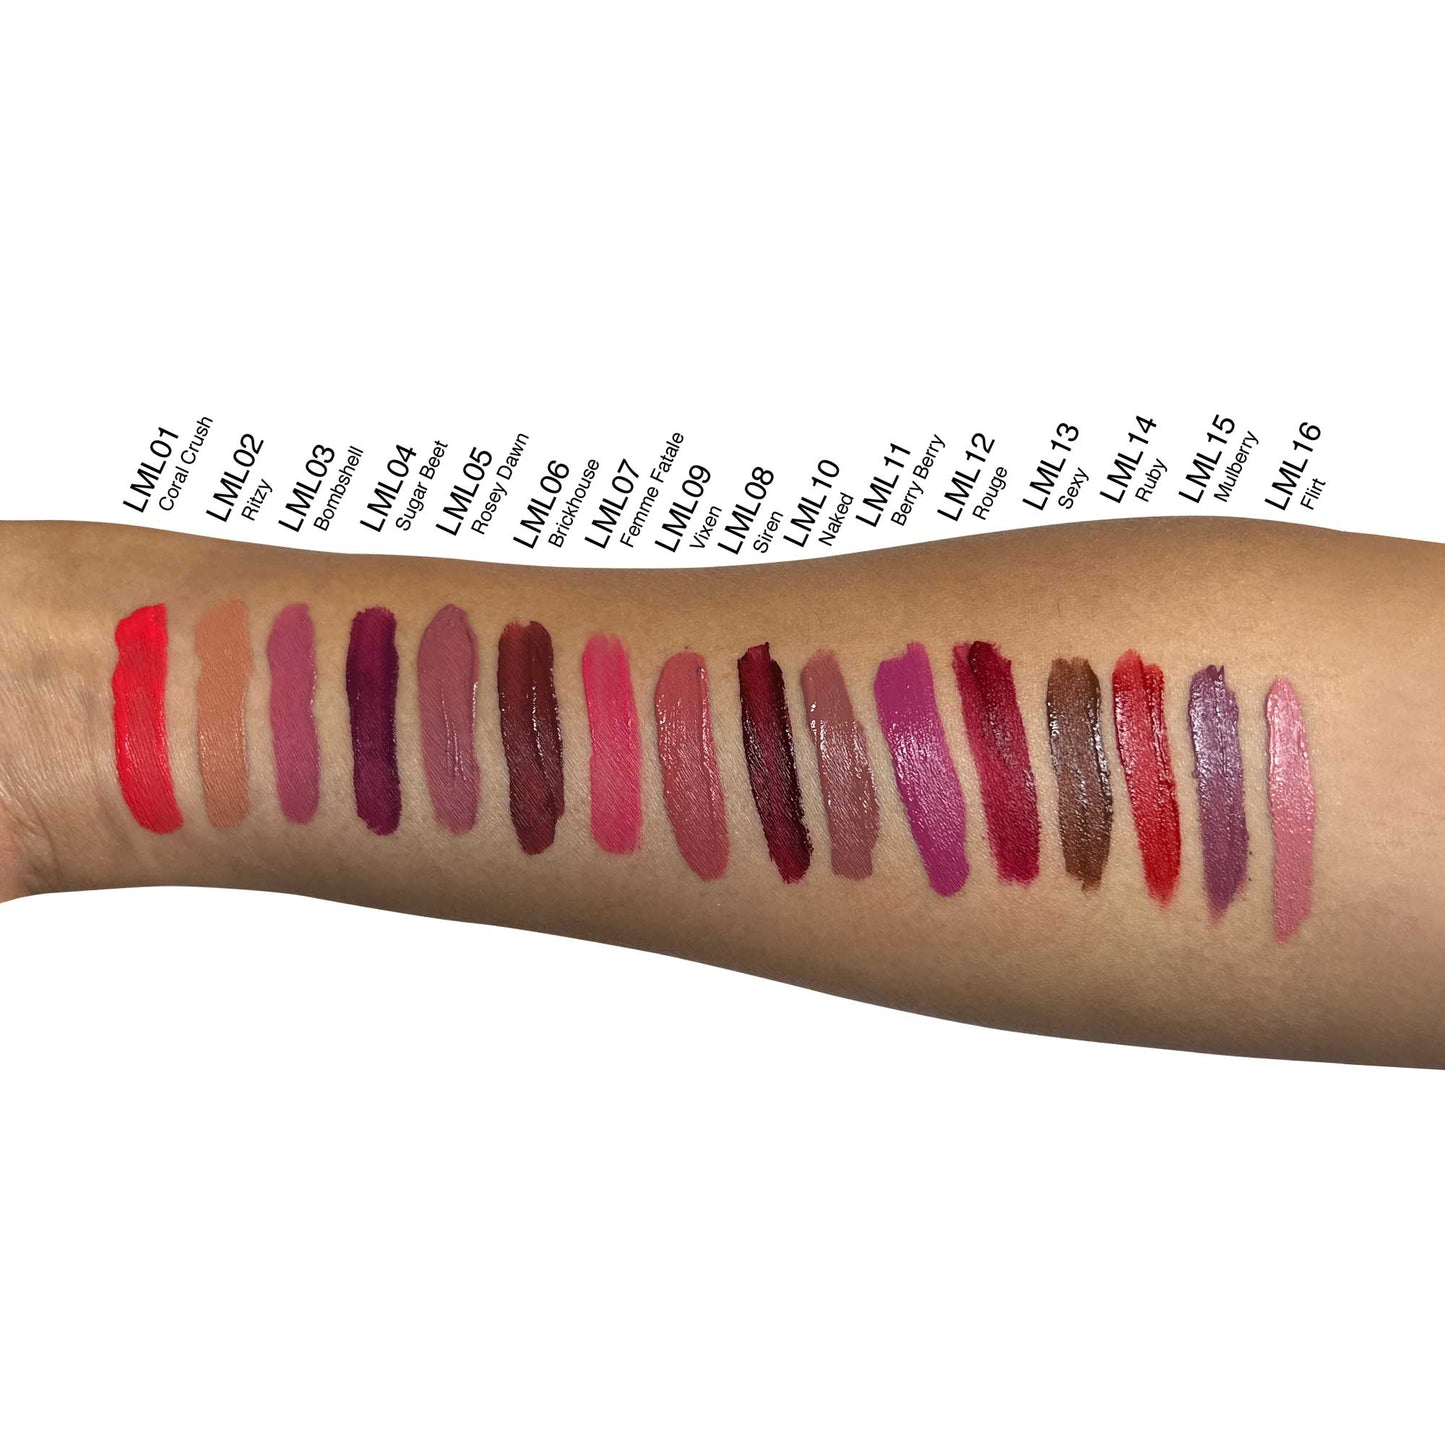 Discover on-trend colors with Cruisin Organics' Liquid to Matte Lipstick - Ritzy! Highly pigmented shades, all-day wear, and a relatable finish combine for perfect lips on any occasion. Easy application with the slanted doe applicator and a delicious orange sugar scent for confidence all day long.